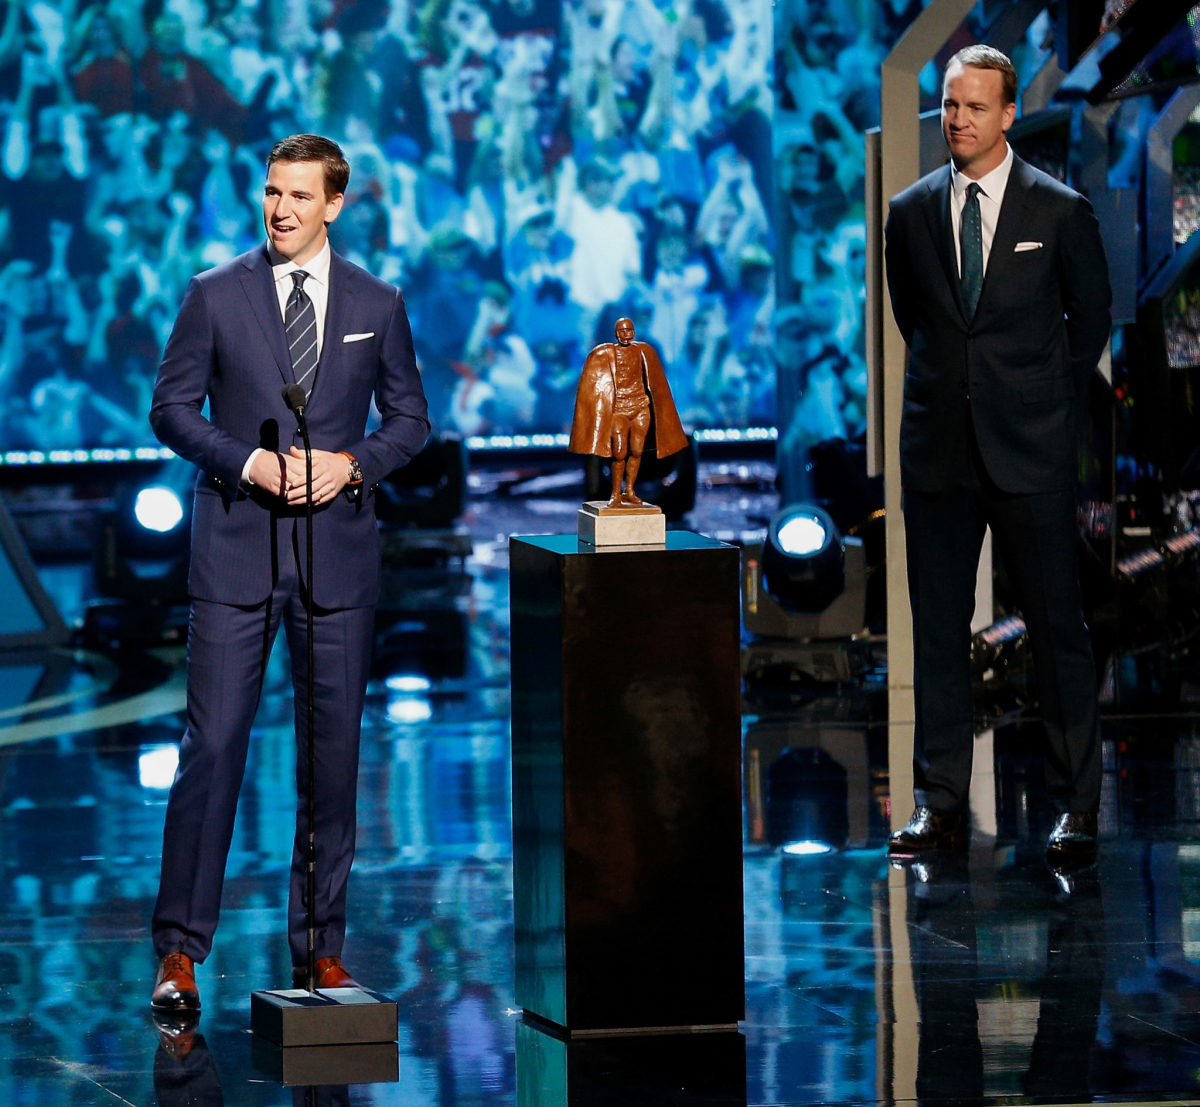 Eli and Peyton Manning on stage at an awards show.